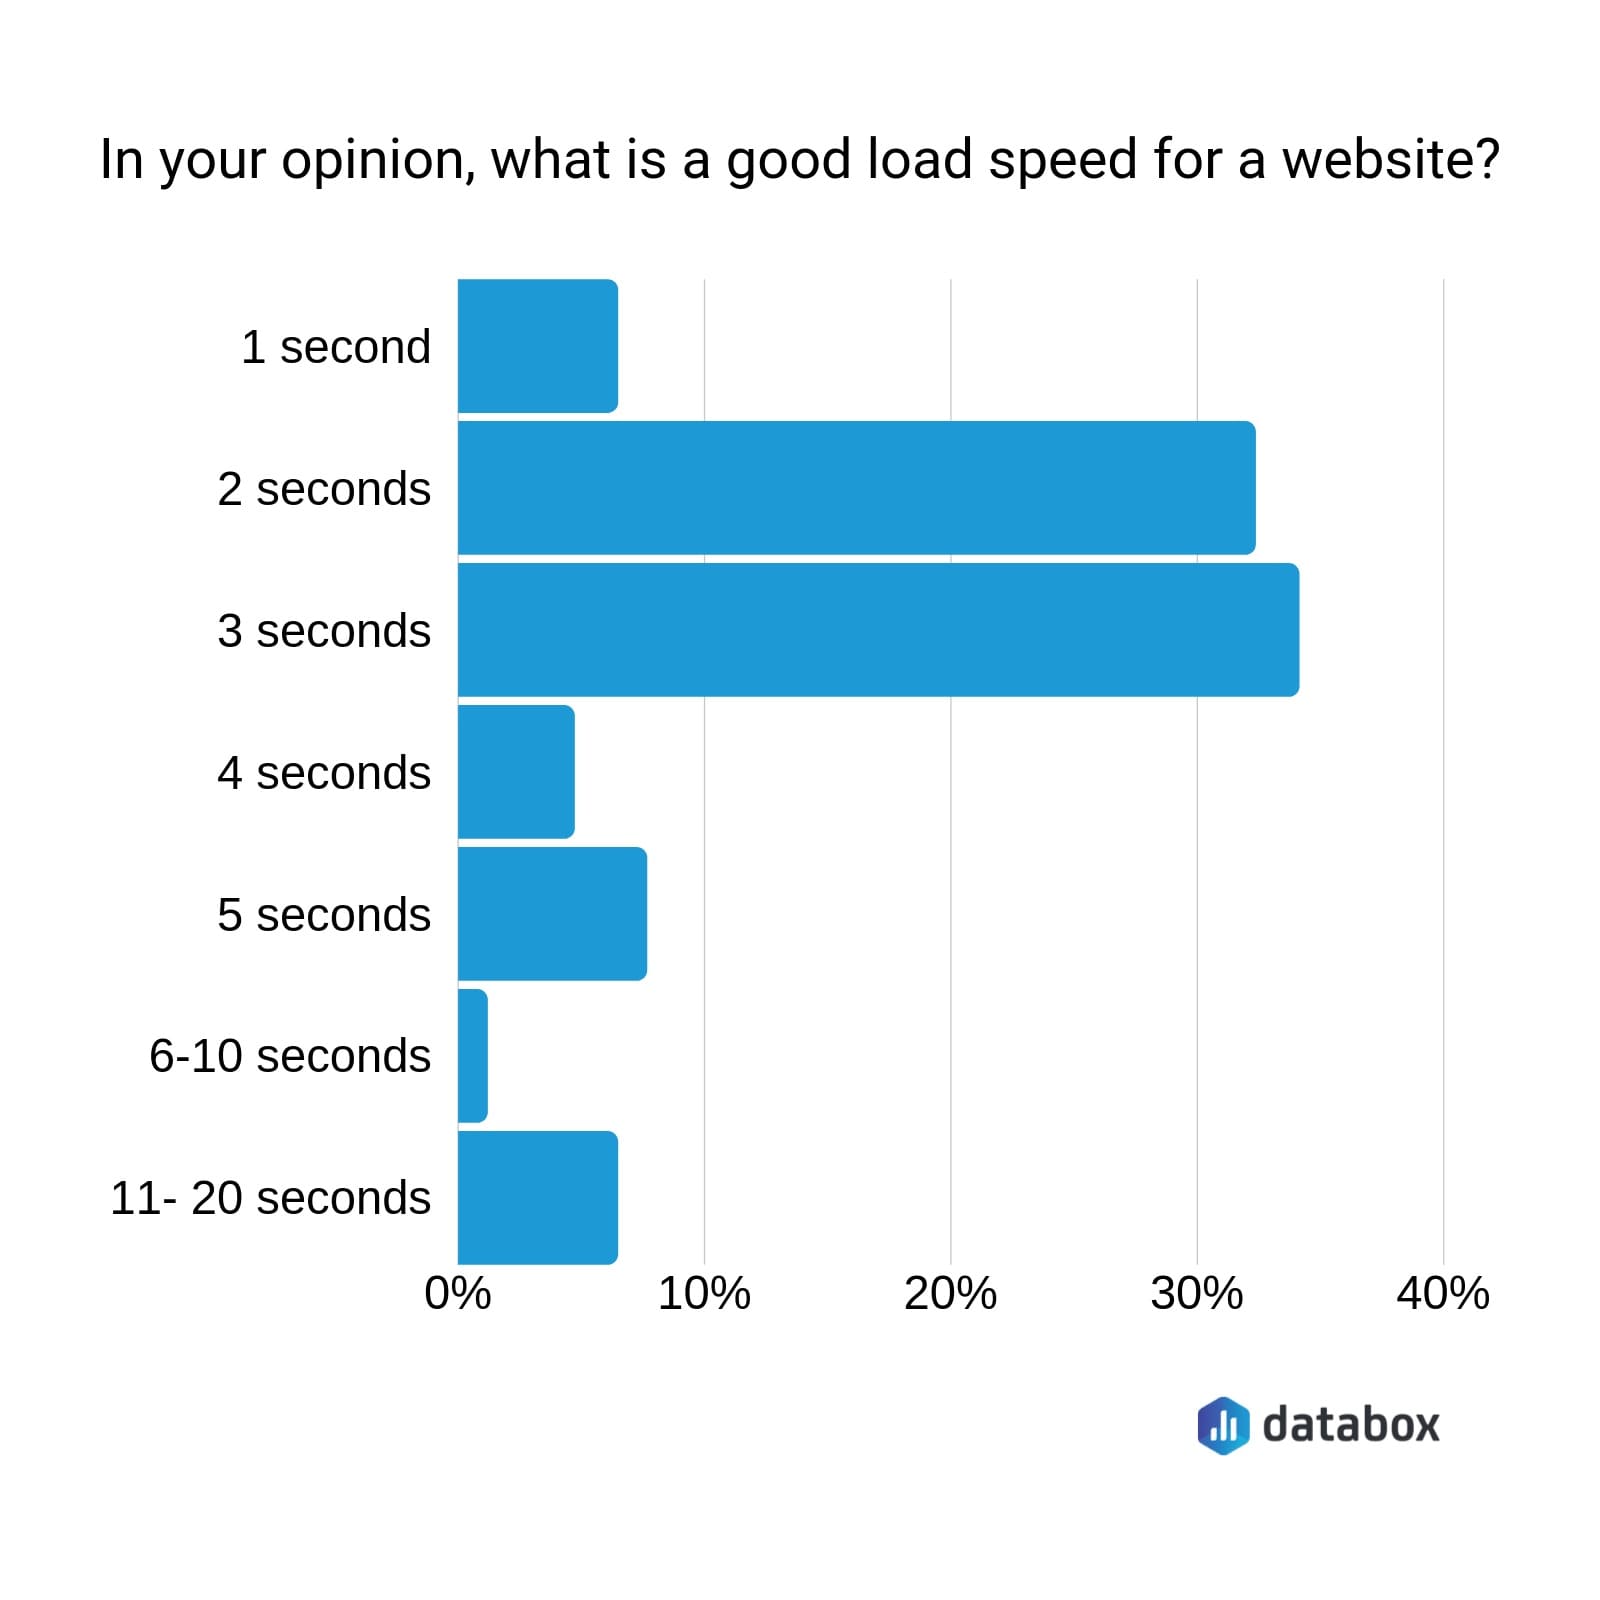 Users' expectations of website speed